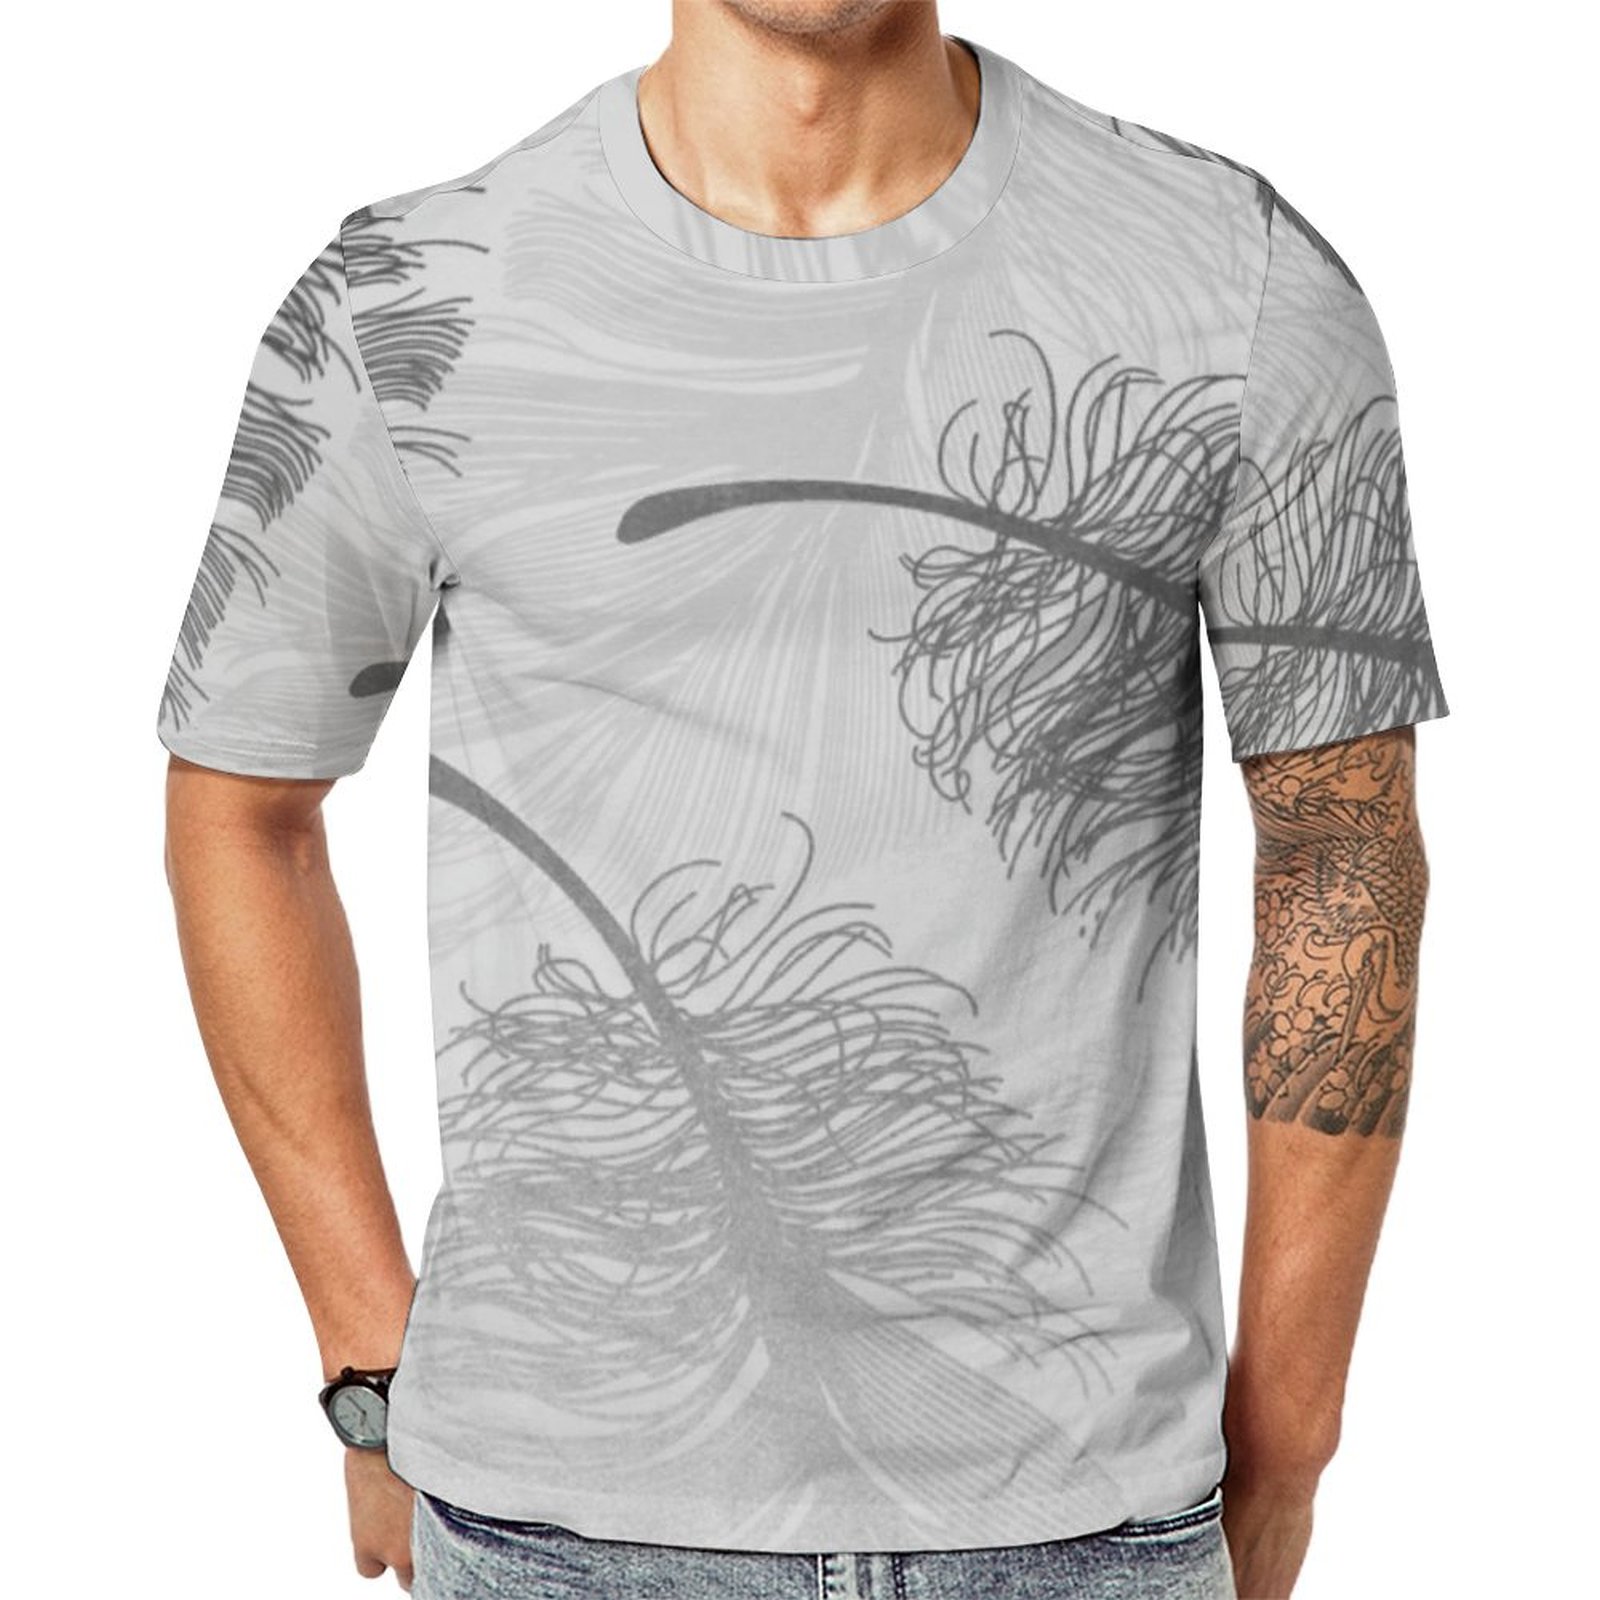 Gray Feather Leave Short Sleeve Print Unisex Tshirt Summer Casual Tees for Men and Women Coolcoshirts